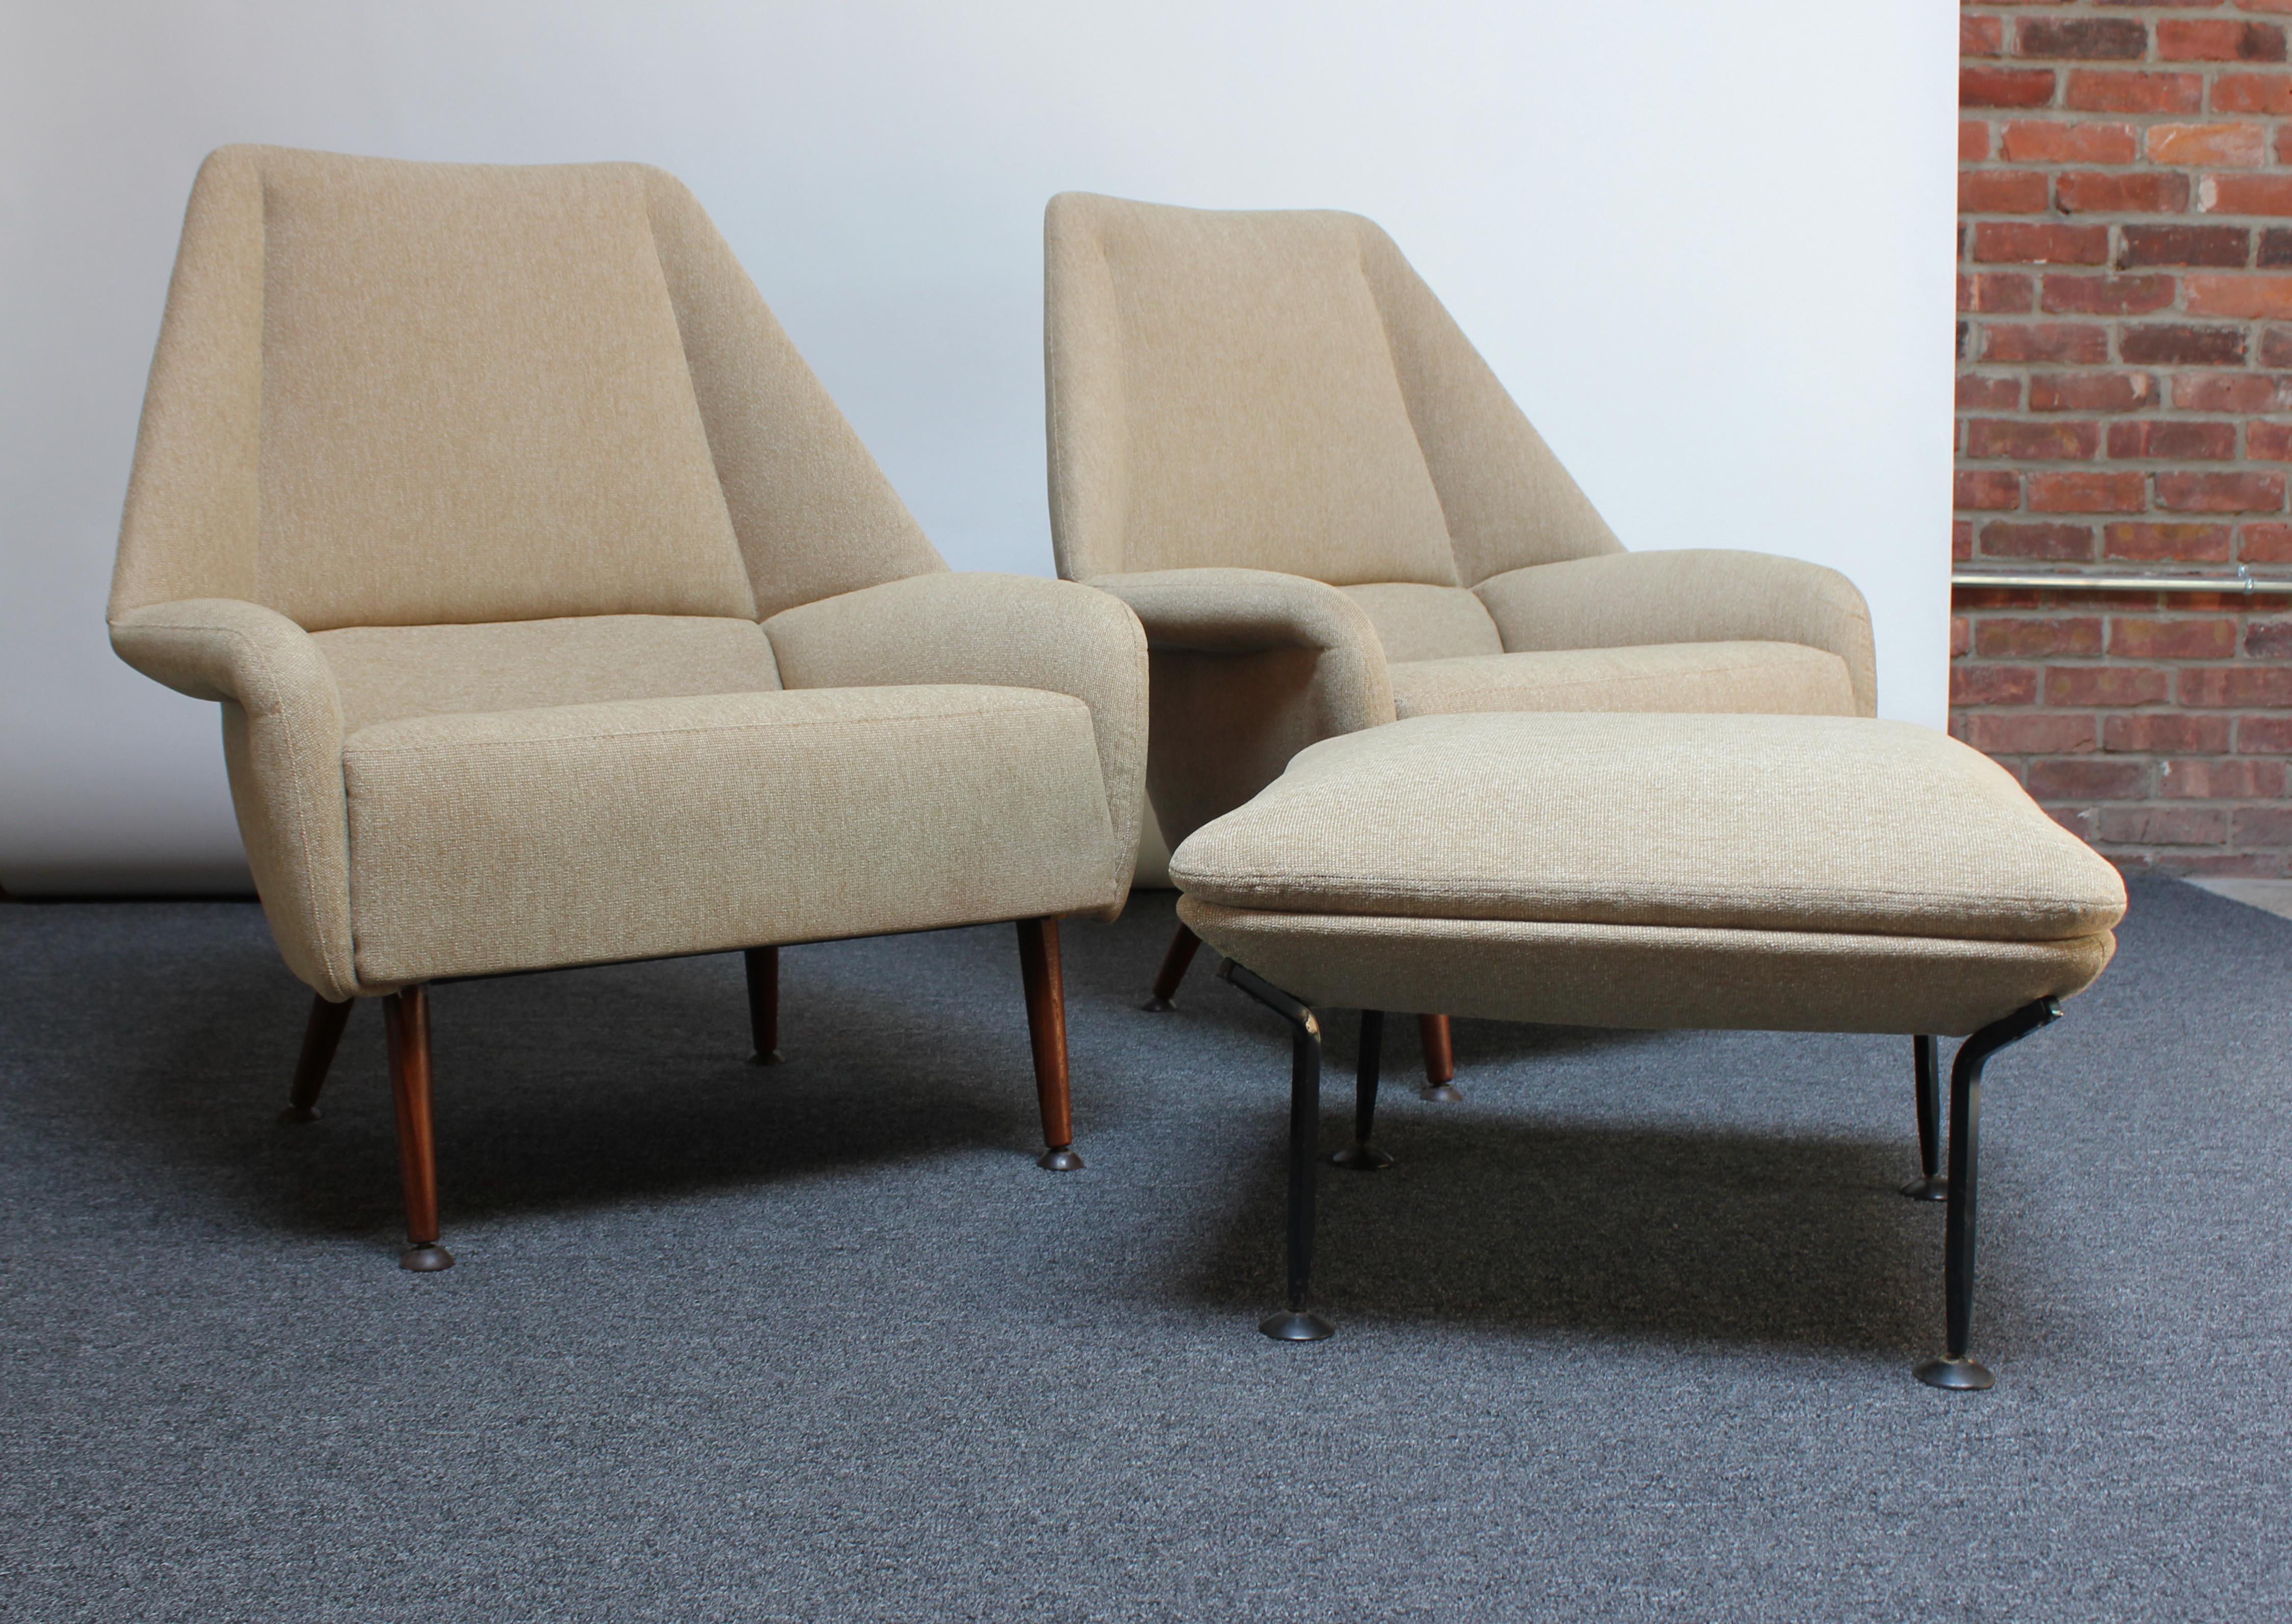 This rare set of 'Flamingo' lounge chairs was designed in 1959 by the English designer, Ernest Race. The same year the chair was introduced, it was granted the 'design of the year award' by the Council of Industrial Design.
Both chairs and ottoman